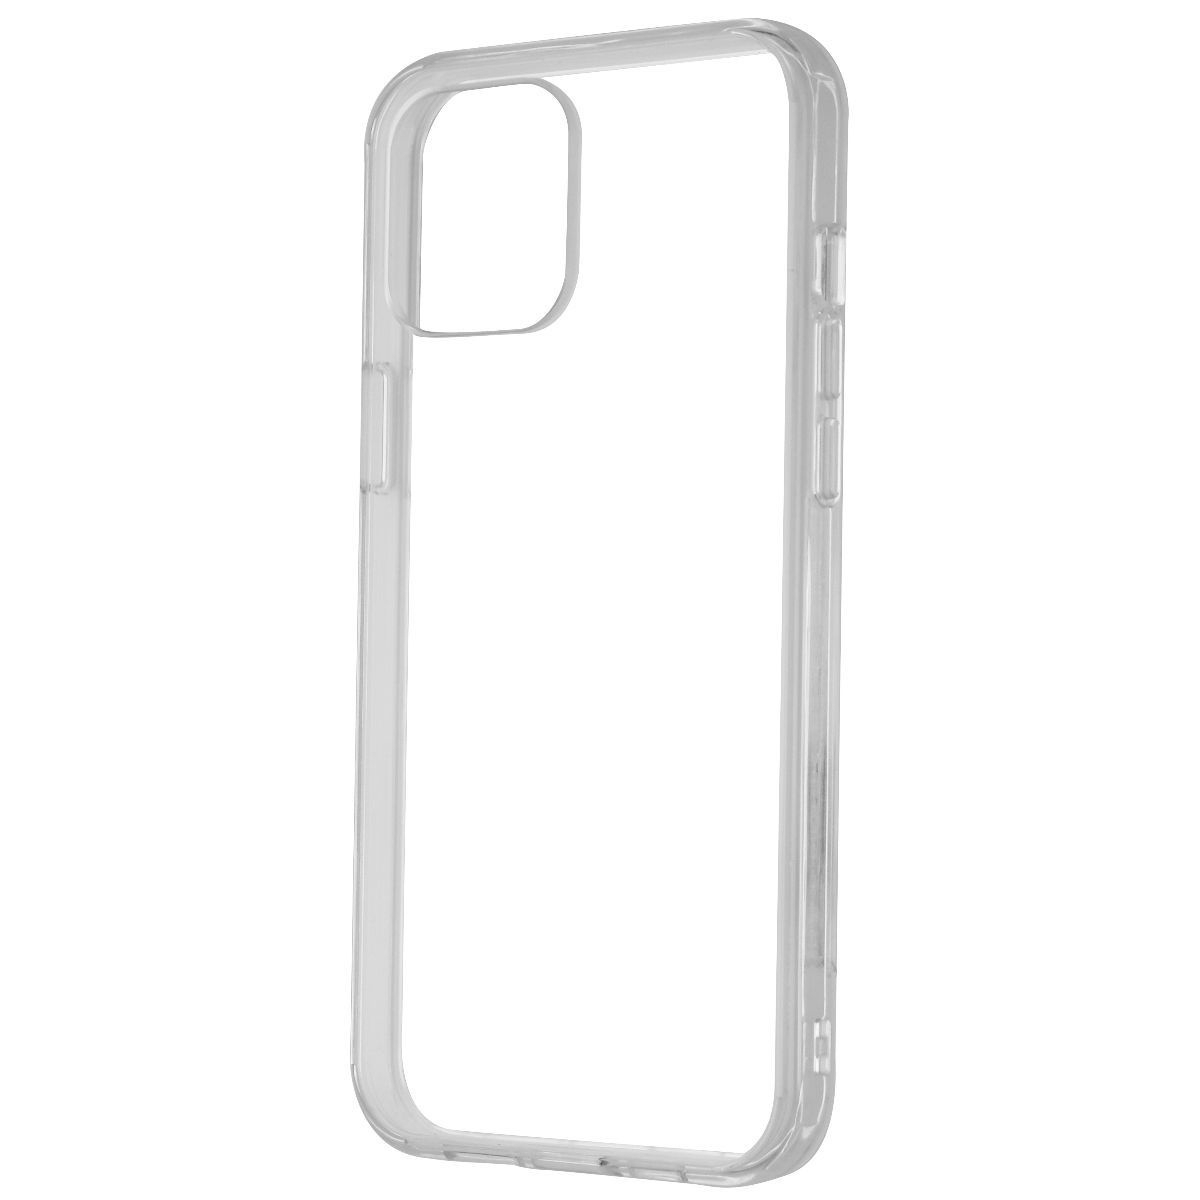 UBREAKIFIX Hardshell Case For Apple IPhone 12 Pro Max - Clear